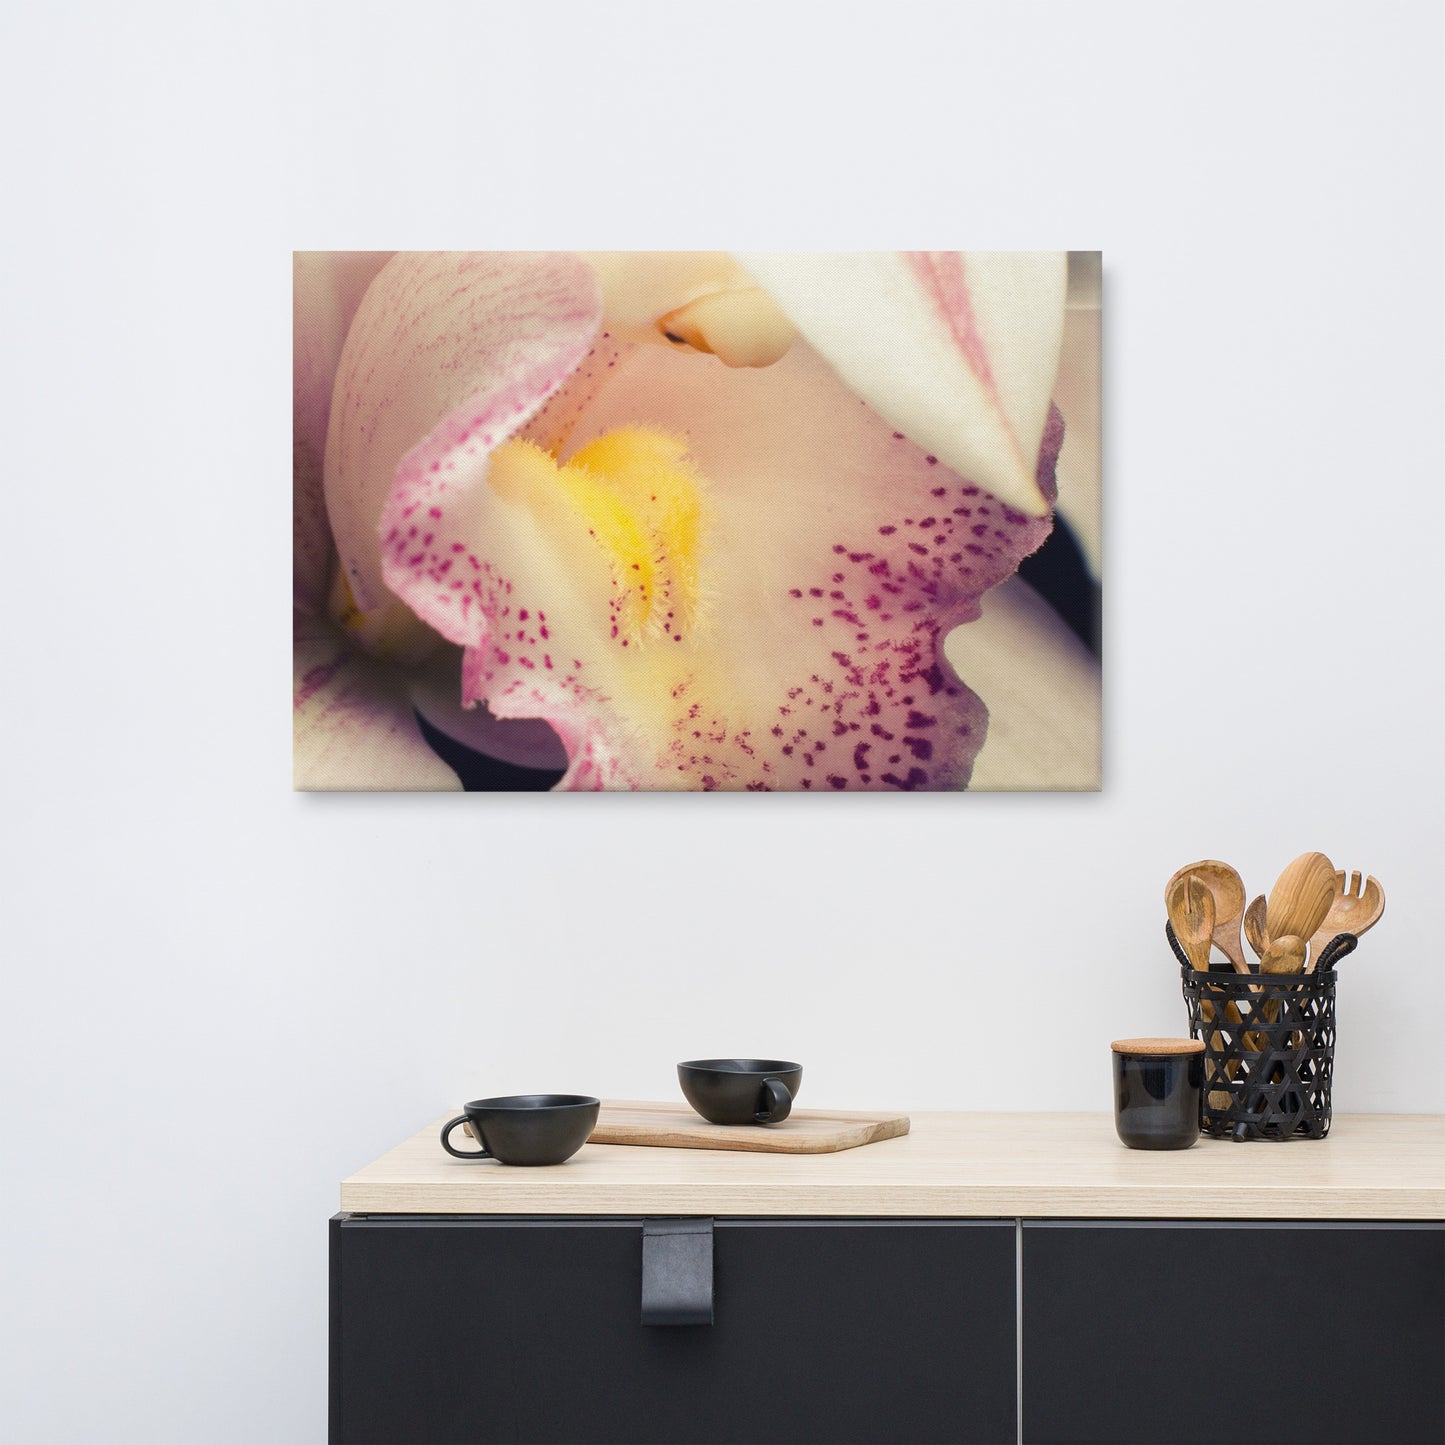 Close-up of Orchid Floral Nature Canvas Wall Art Prints